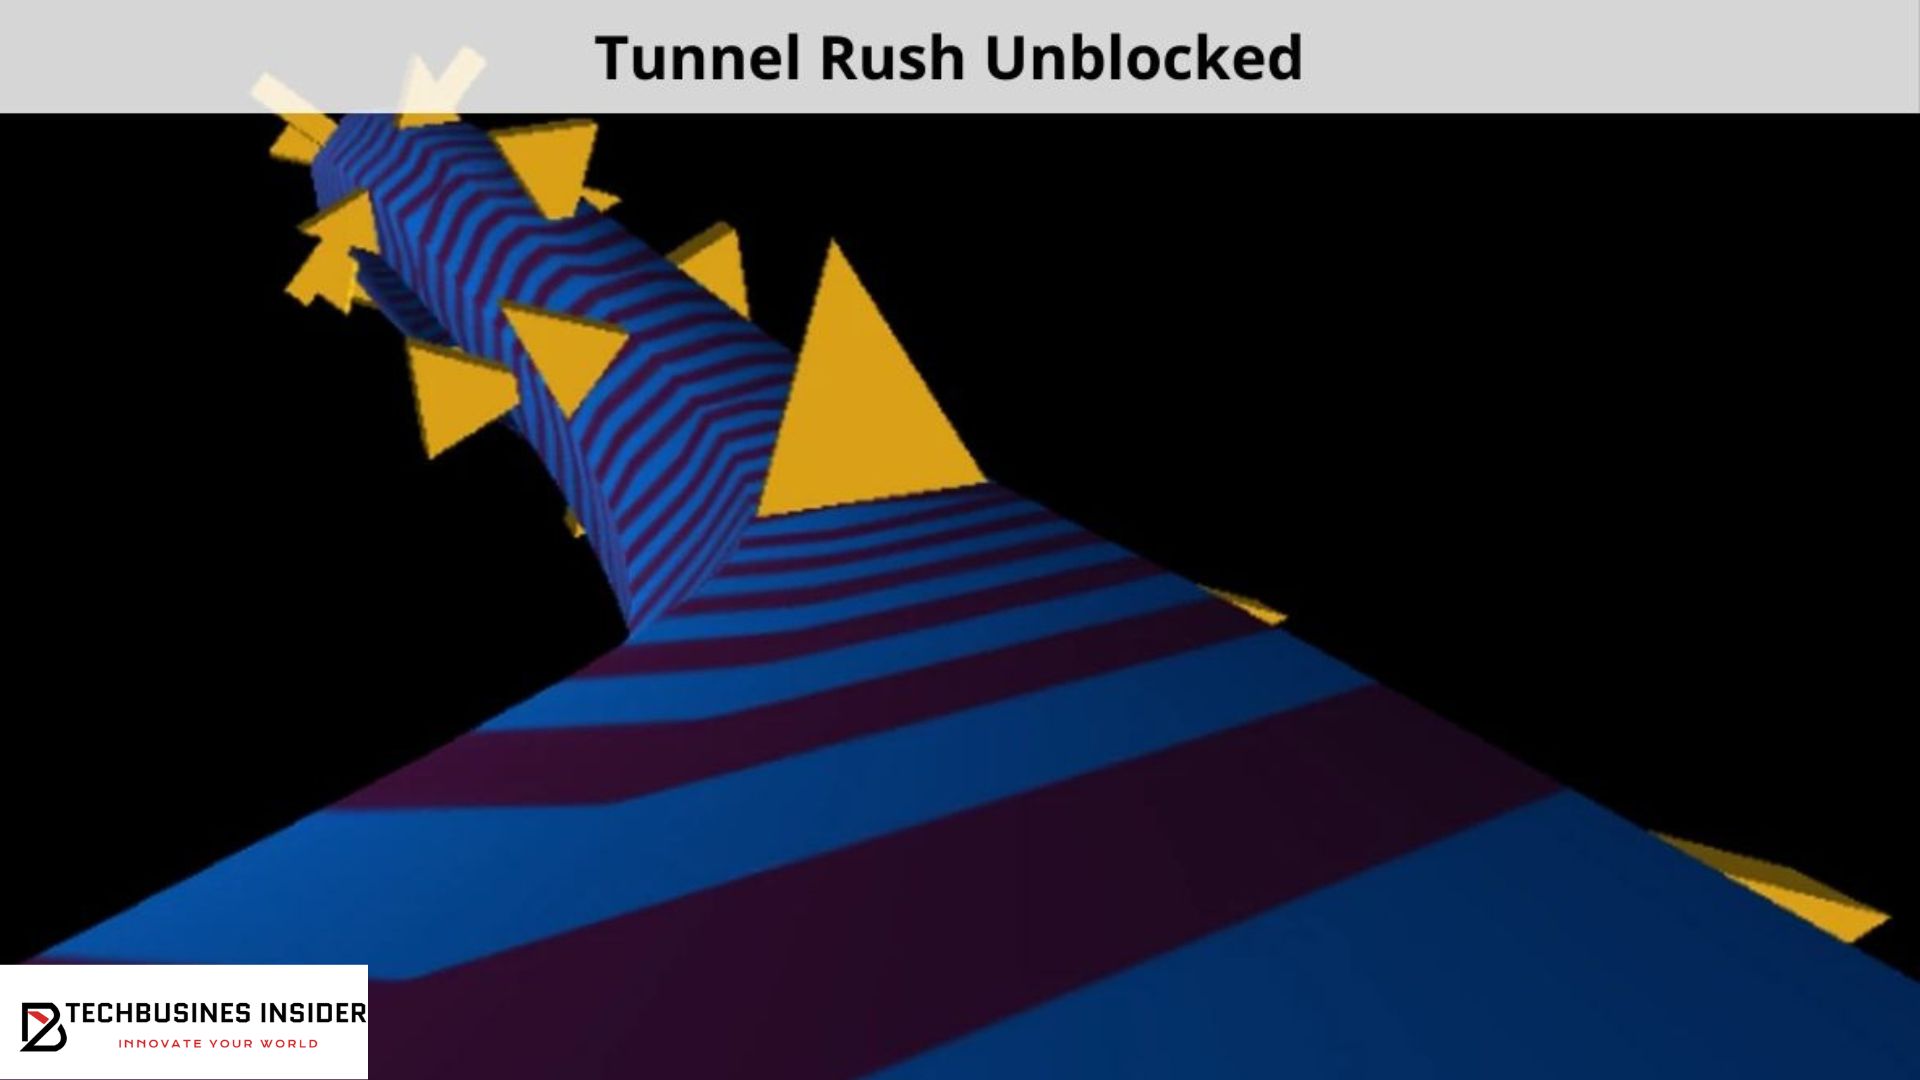 Where can you play Tunnel Rush unblocked for free?